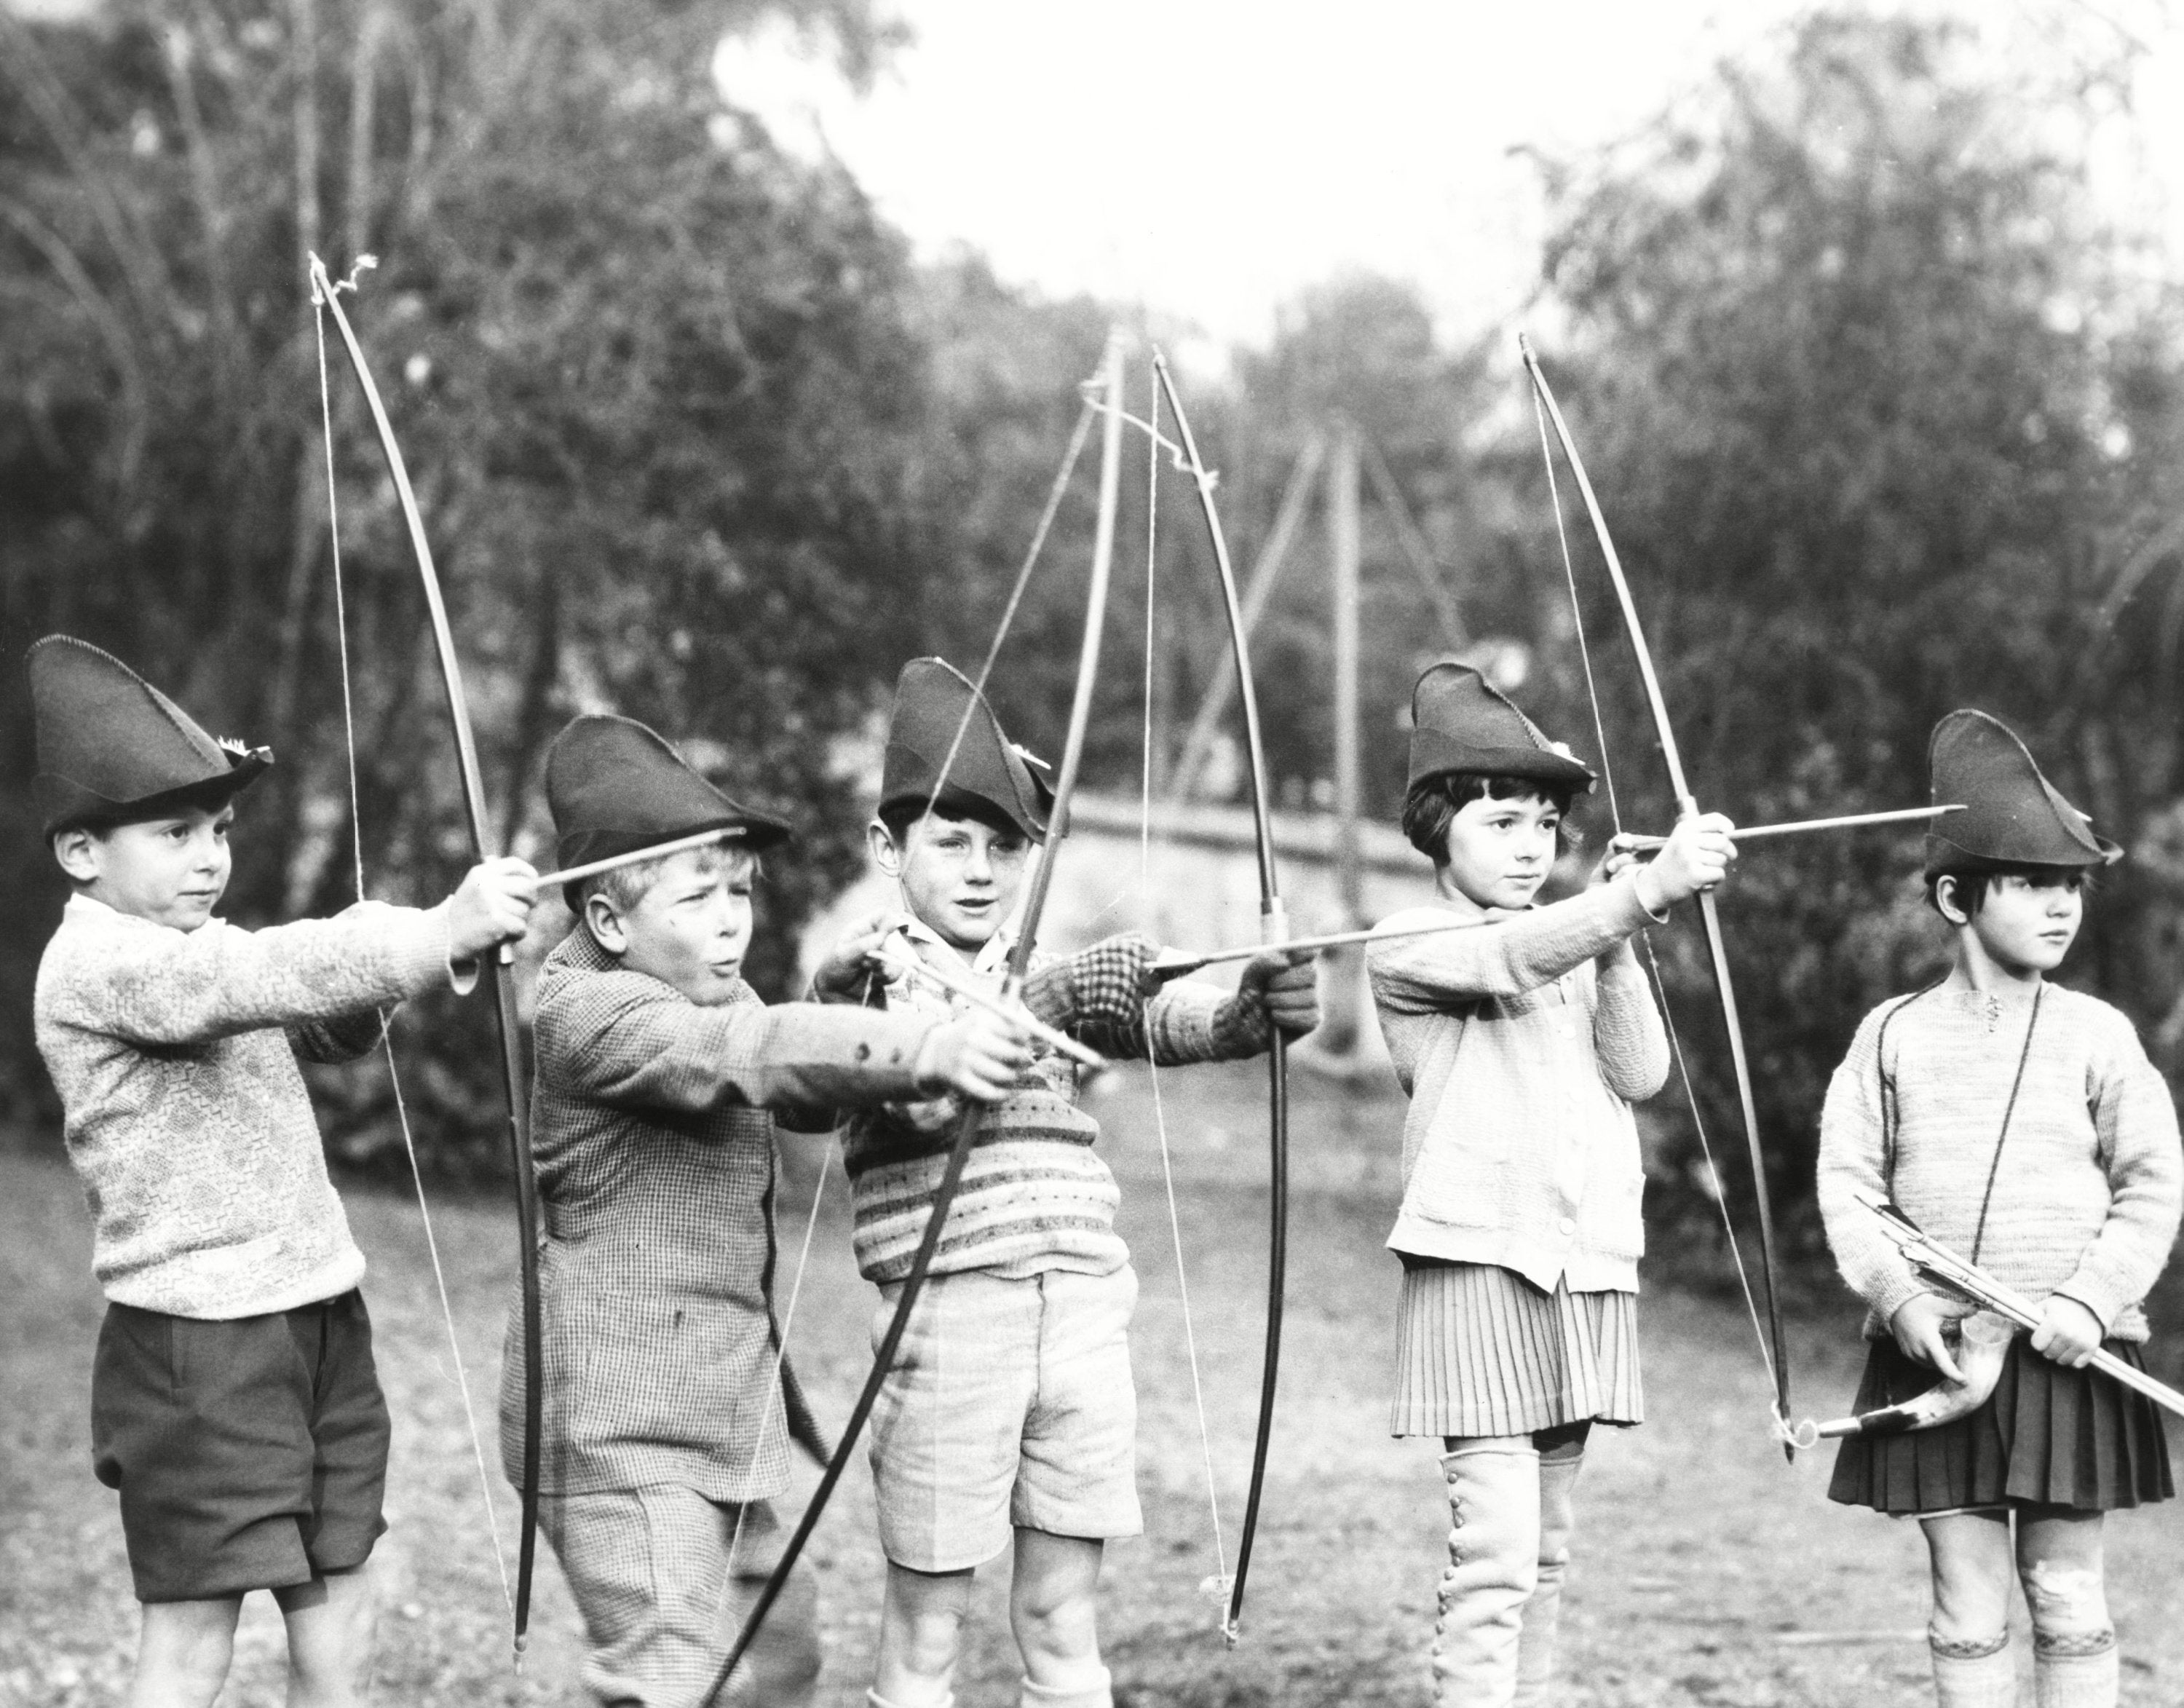 Prince Philip (second left) taking archery lessons at the MacJannet American school in St Cloud